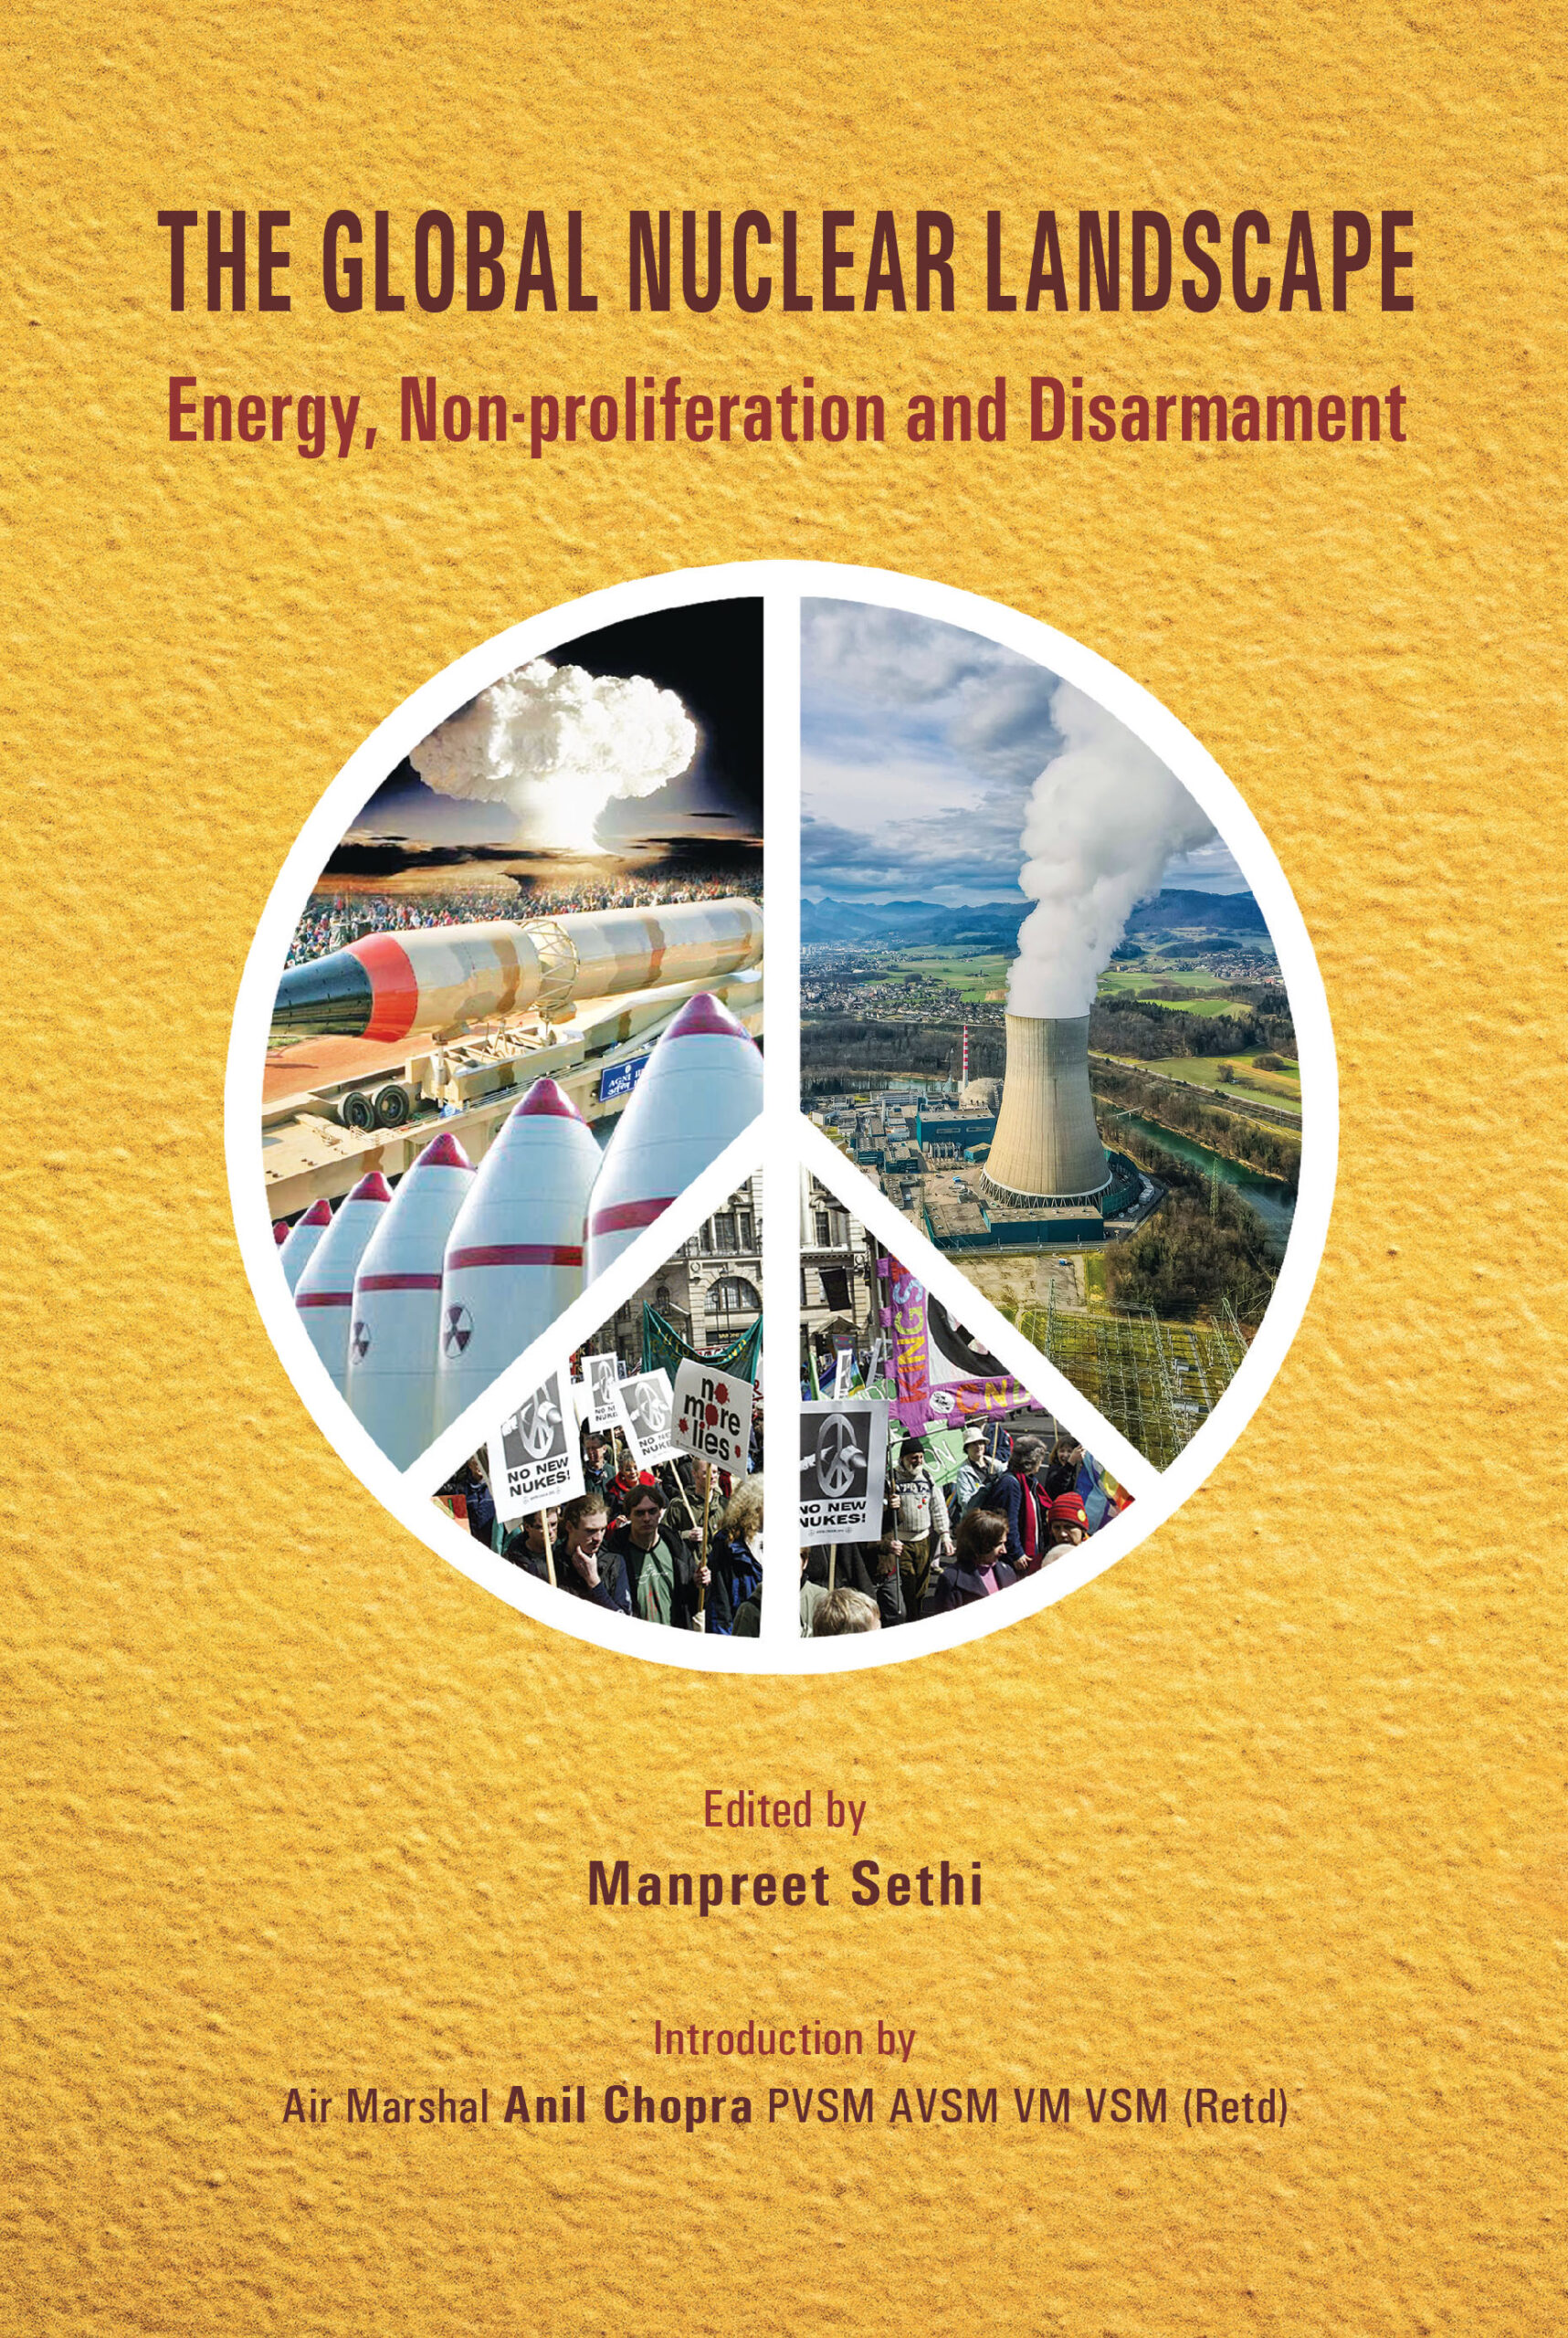 The Global Nuclear Landscape: Energy, Non-proliferation and Disarmament